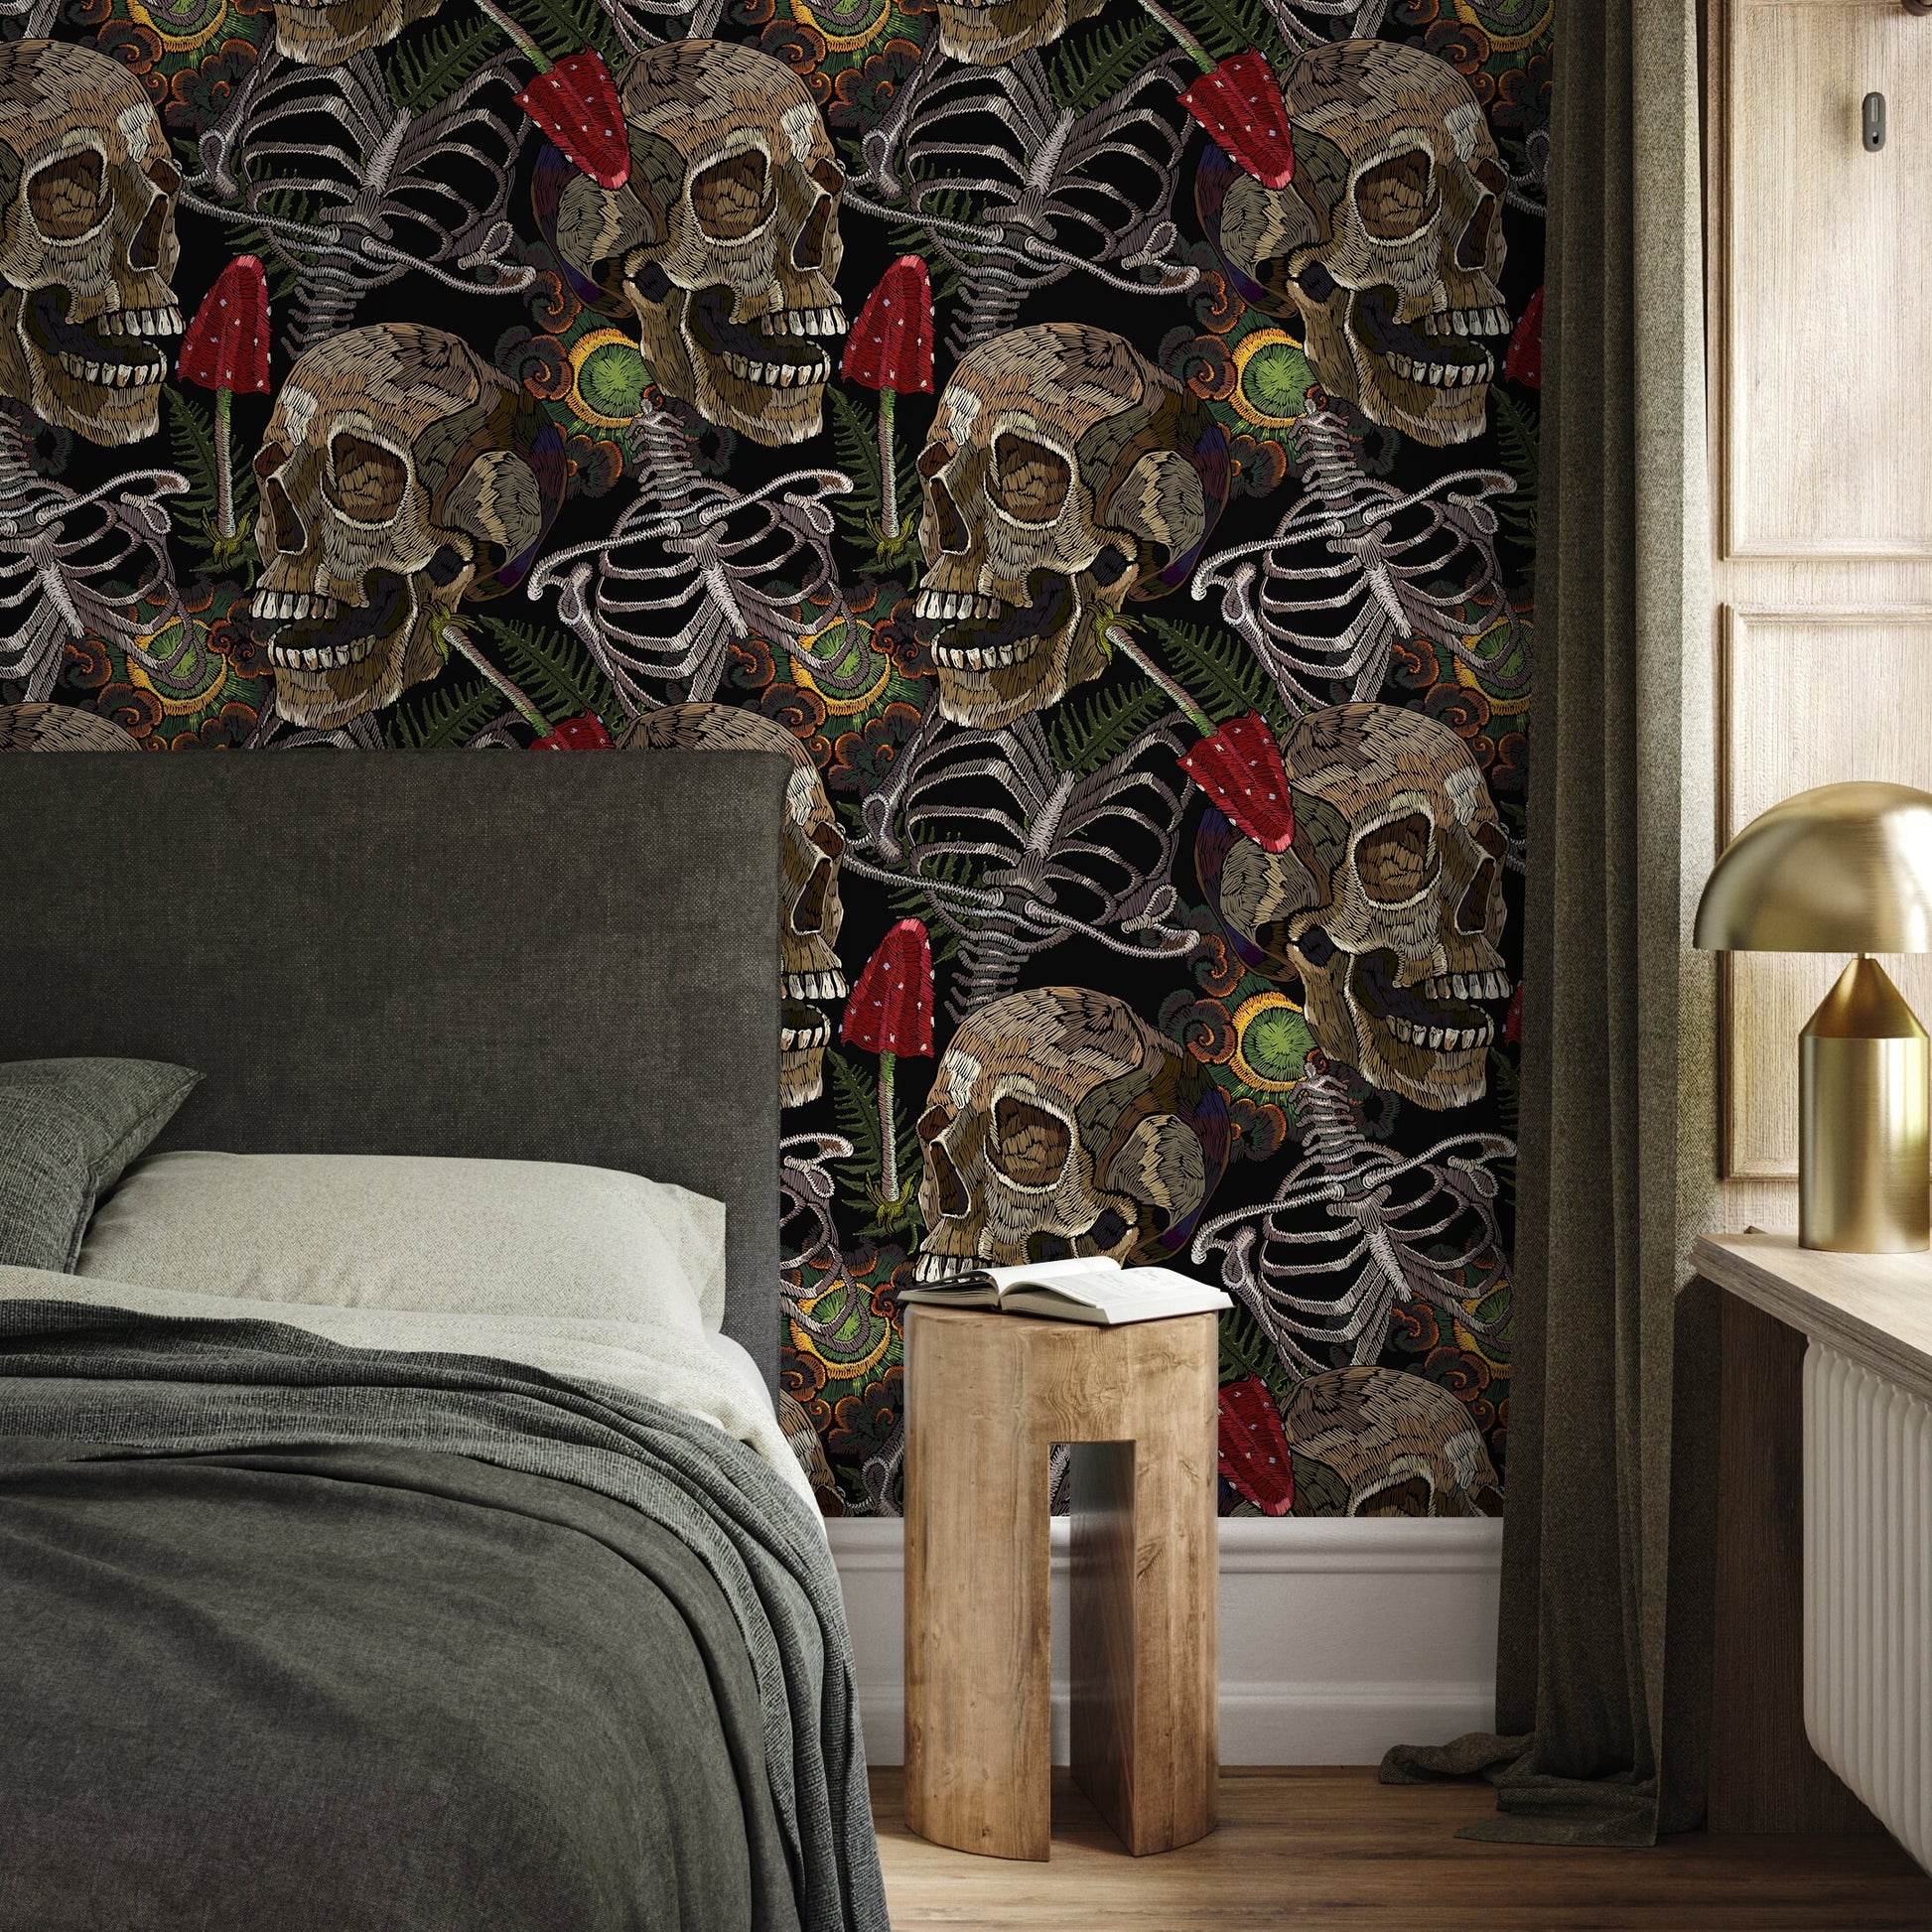 Fern and Skull Wallpaper Peel and Stick and Traditional Wallpaper - D917